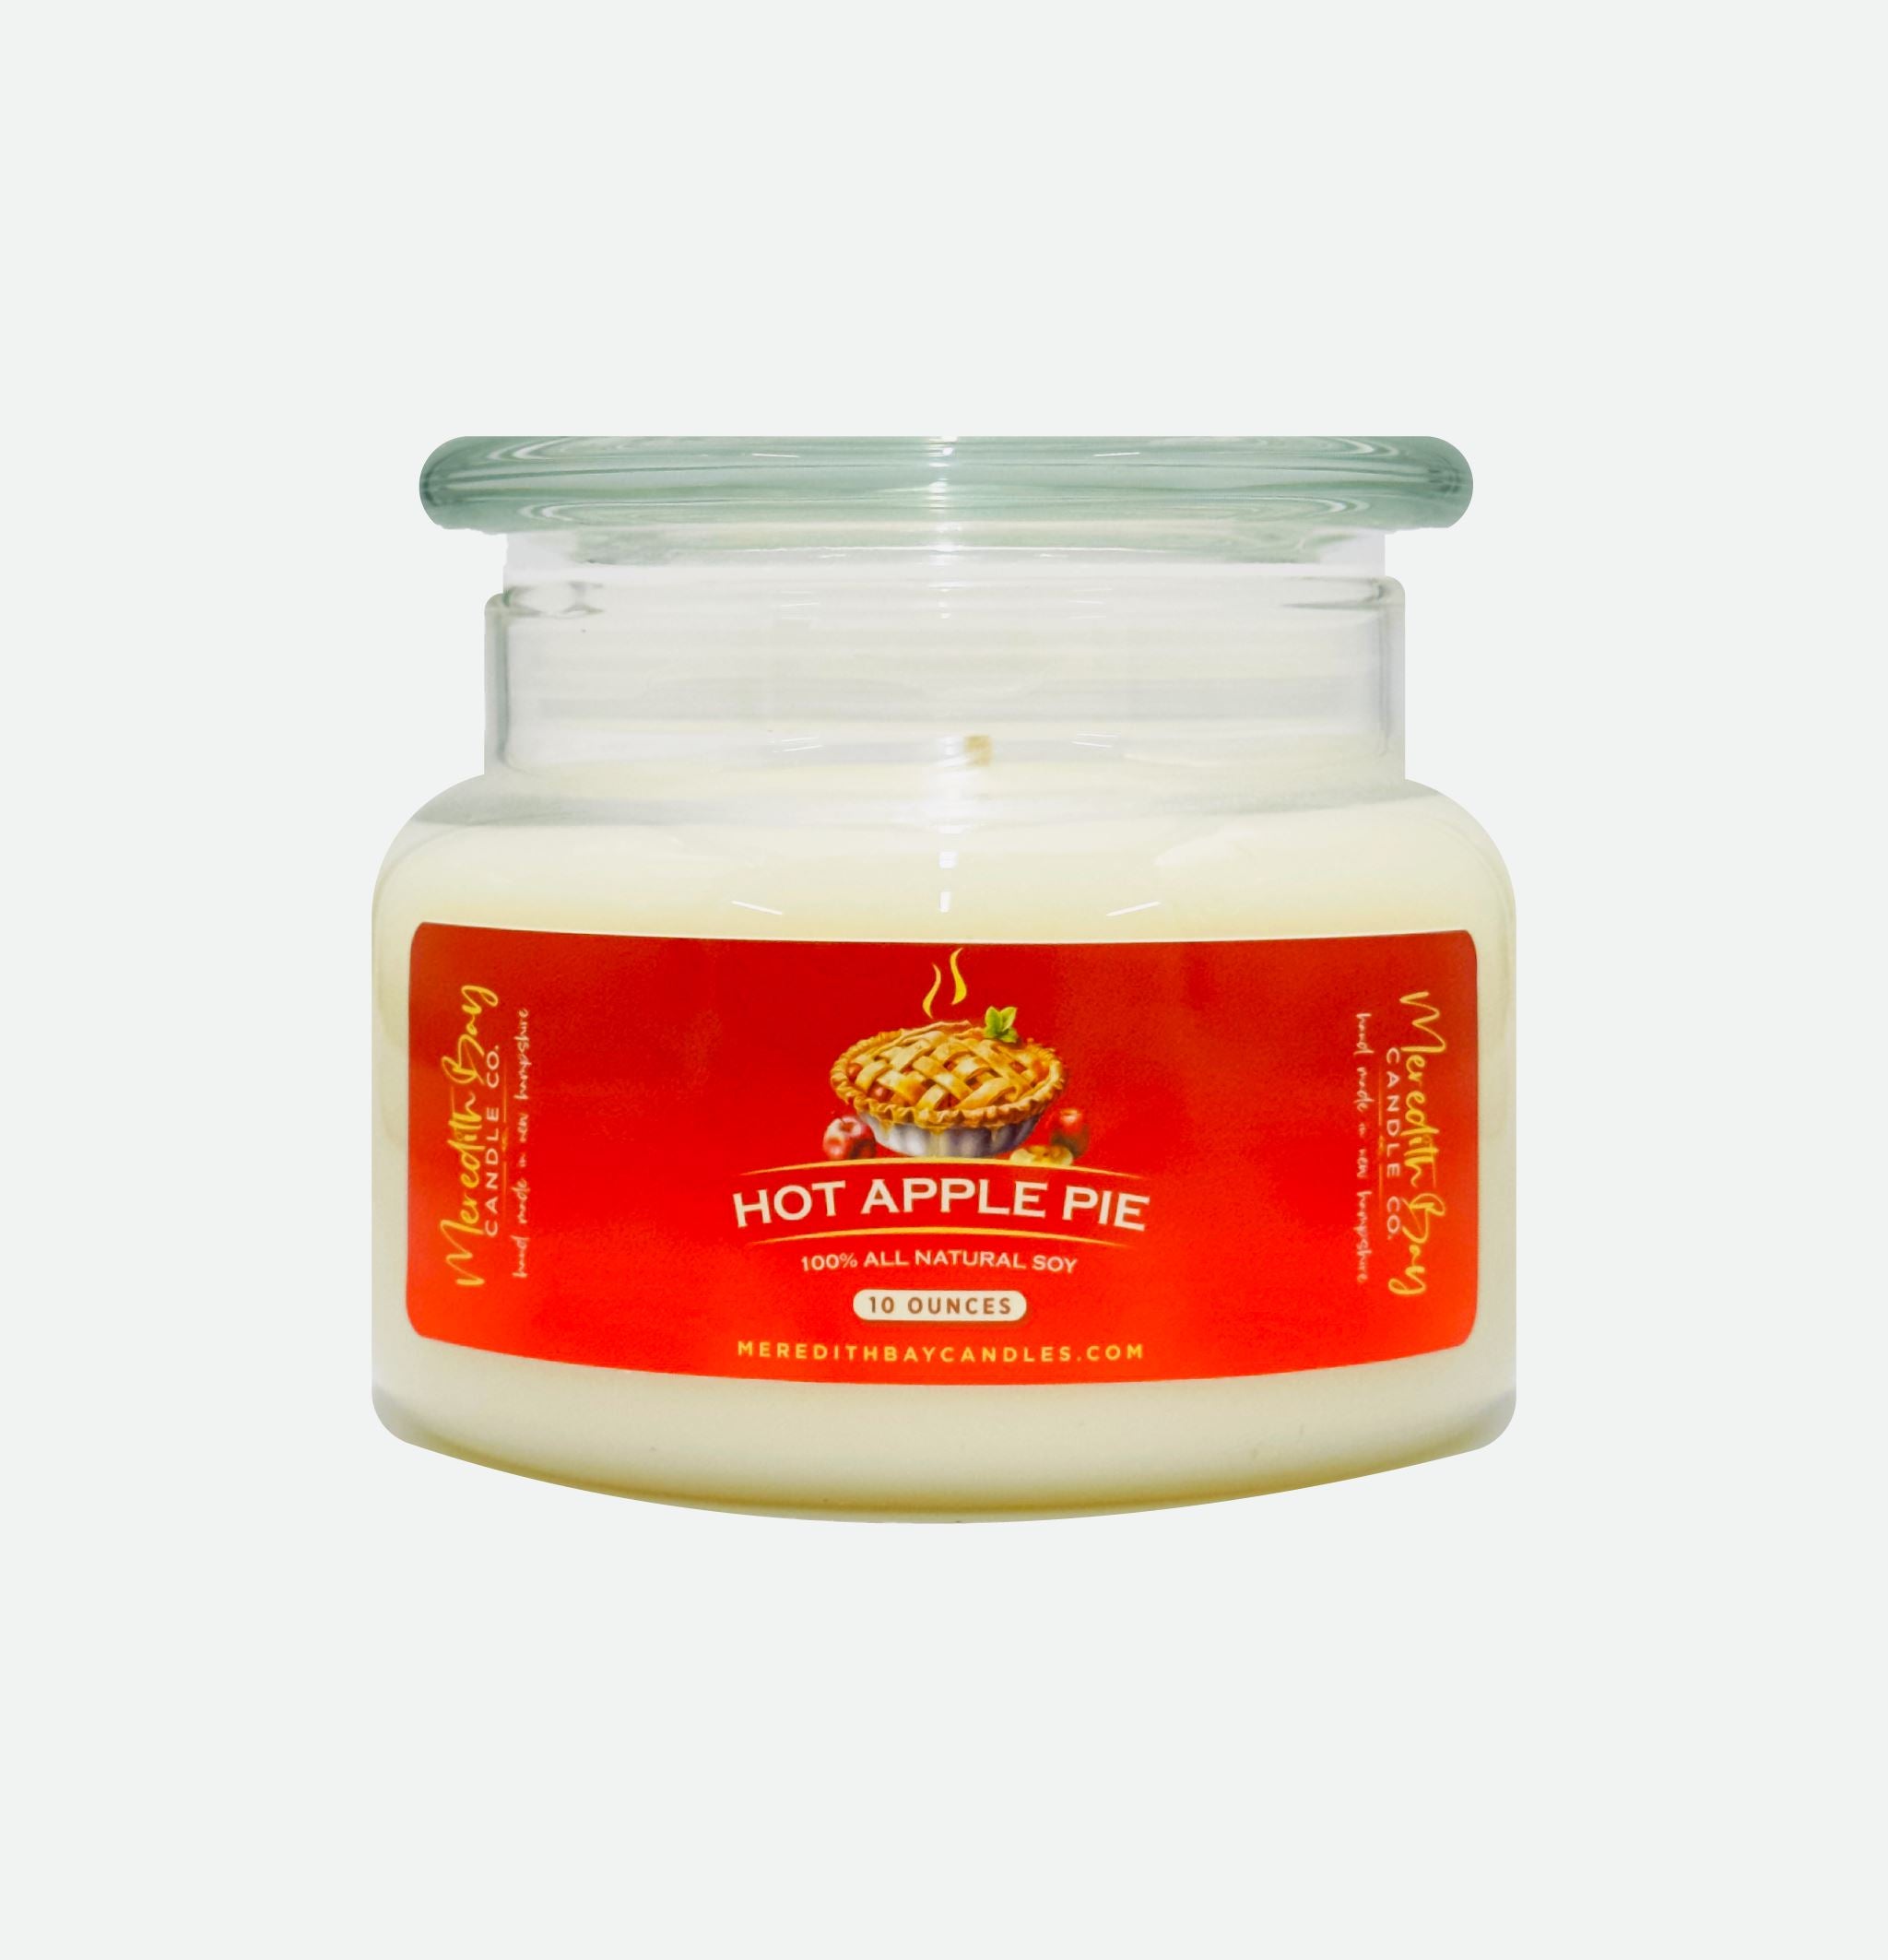 Hot Apple Pie Soy Candle Meredith Bay Candle Co 10 Oz 